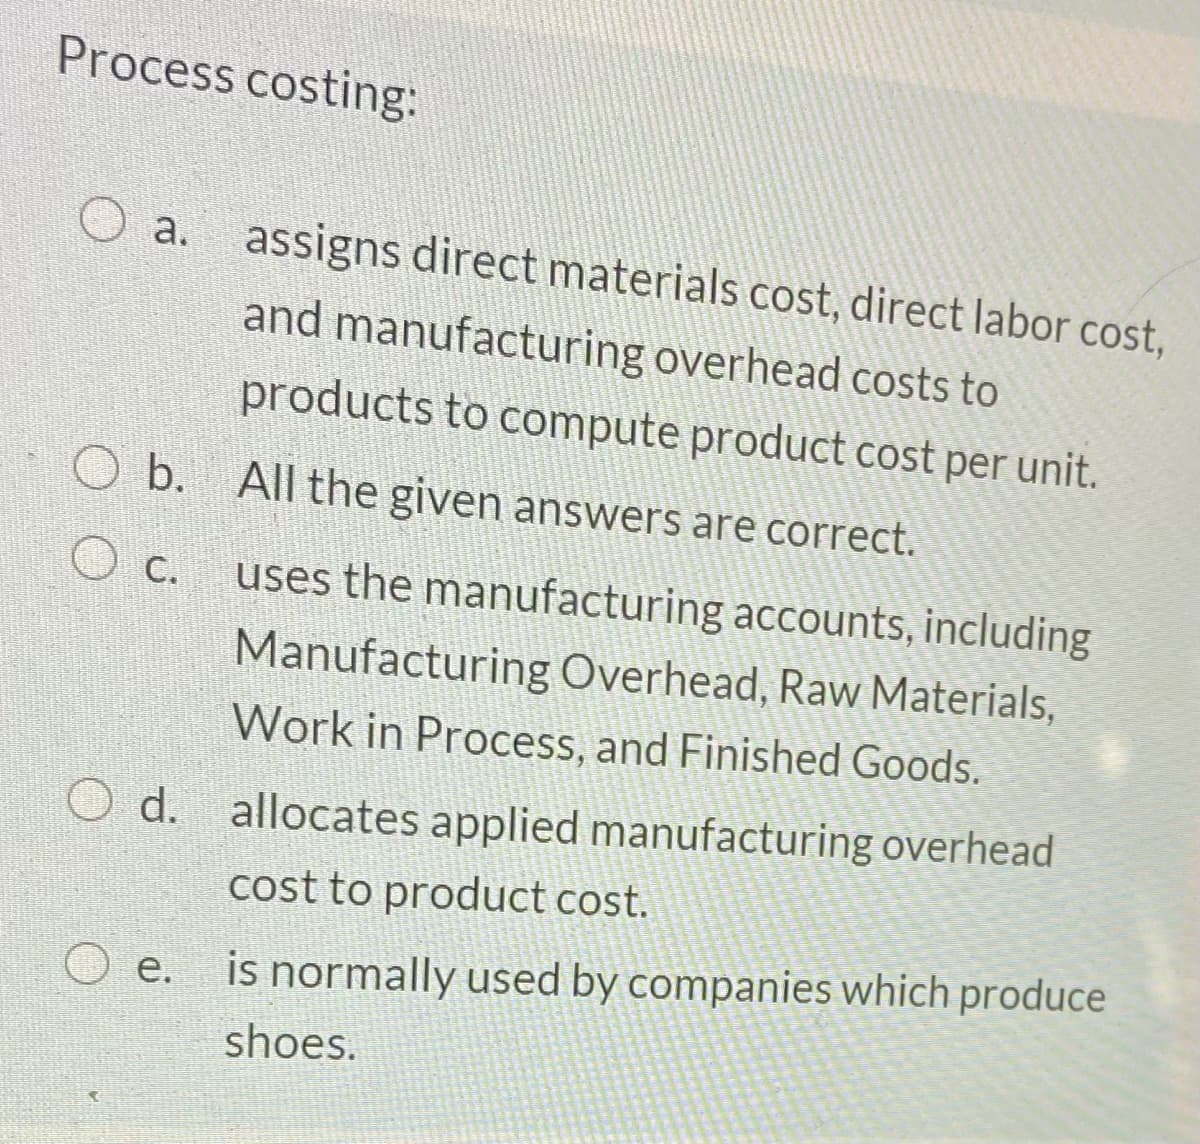 Process costing:
a.
assigns direct materials cost, direct labor cost,
and manufacturing overhead costs to
products to compute product cost per unit.
b. All the given answers are correct.
uses the manufacturing accounts, including
O c.
Manufacturing Overhead, Raw Materials,
Work in Process, and Finished Goods.
O d. allocates applied manufacturing overhead
cost to product cost.
O e. is normally used by companies which produce
е.
shoes.
